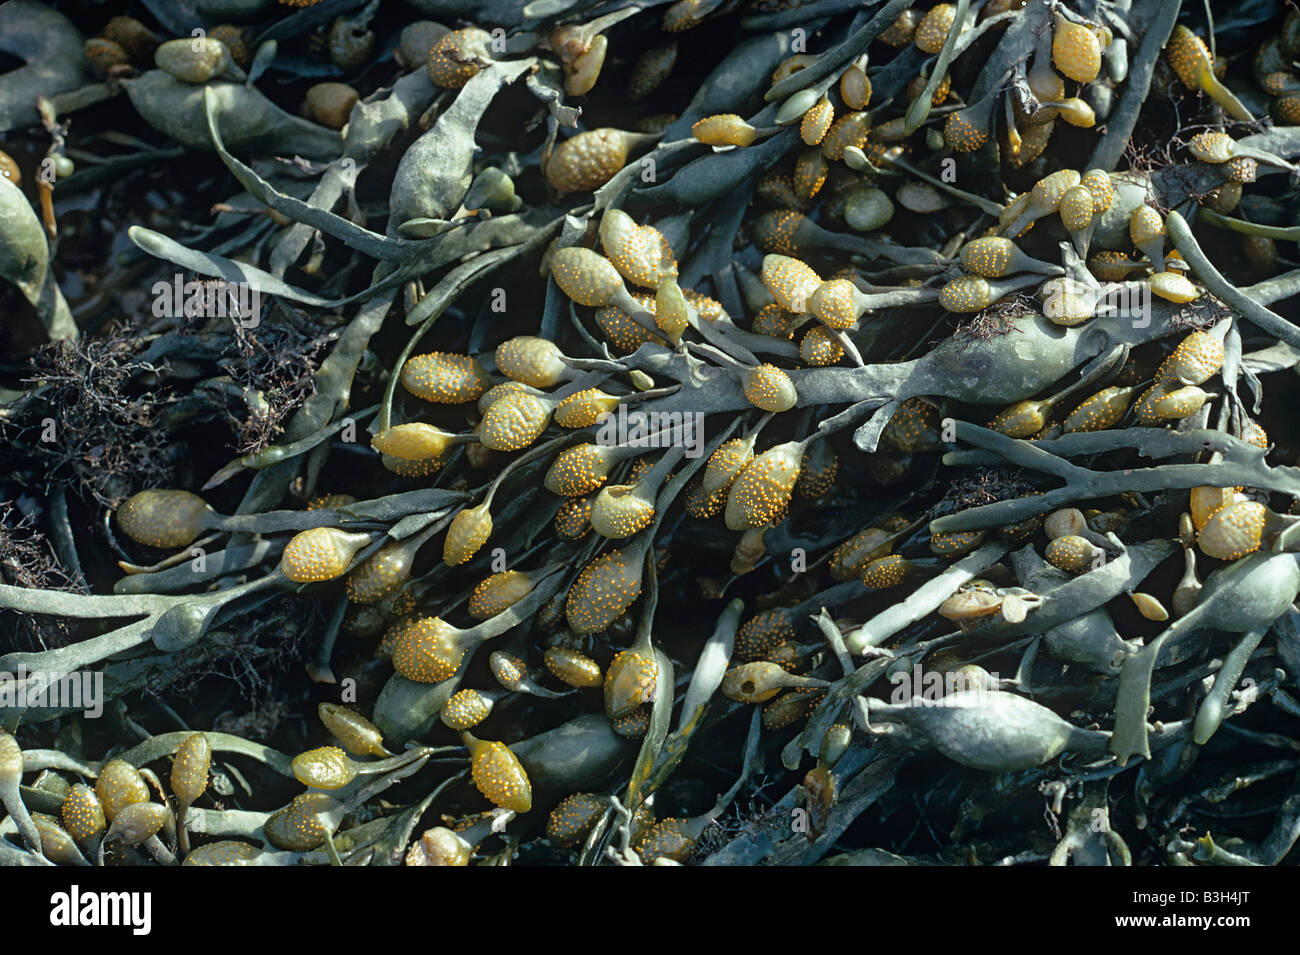 A brown seaweed or alga egg or knotted wrack Ascophyllum nodosum with male conceptacles Stock Photo